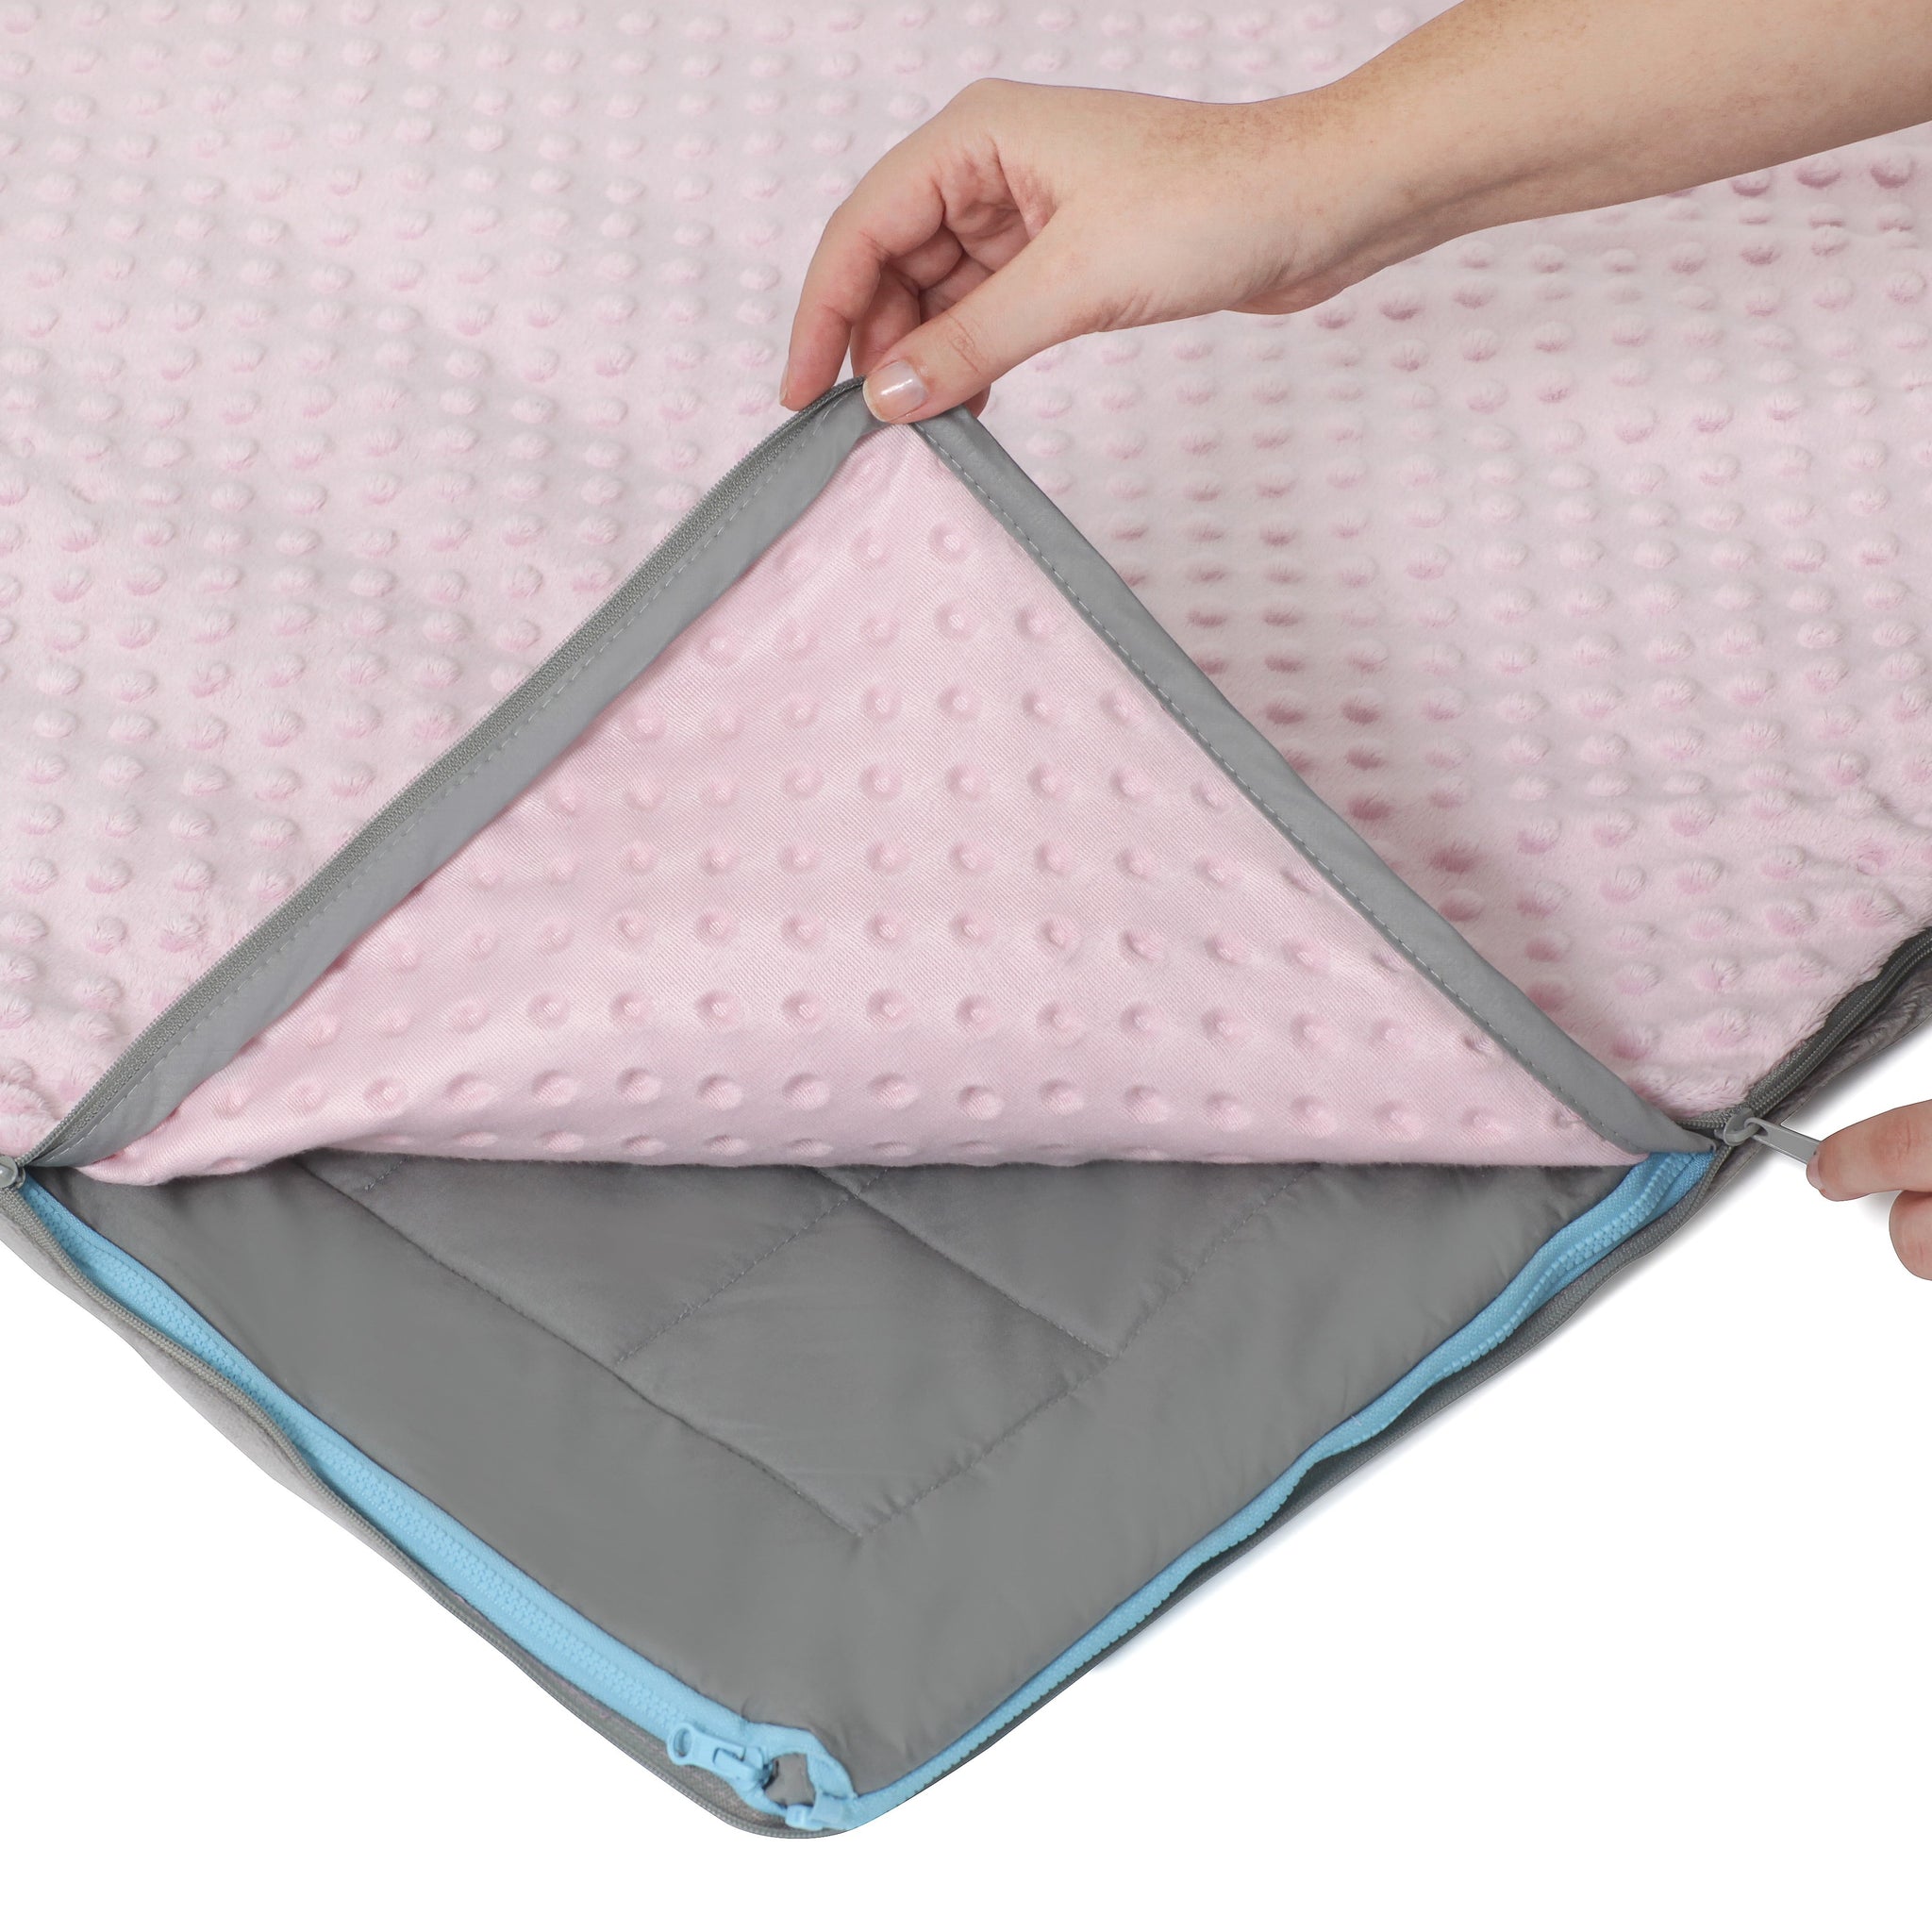 10 Lb Weighted Blanket In Light Pink With Patented Zipper System Serenity Engineered Weighted Blanket